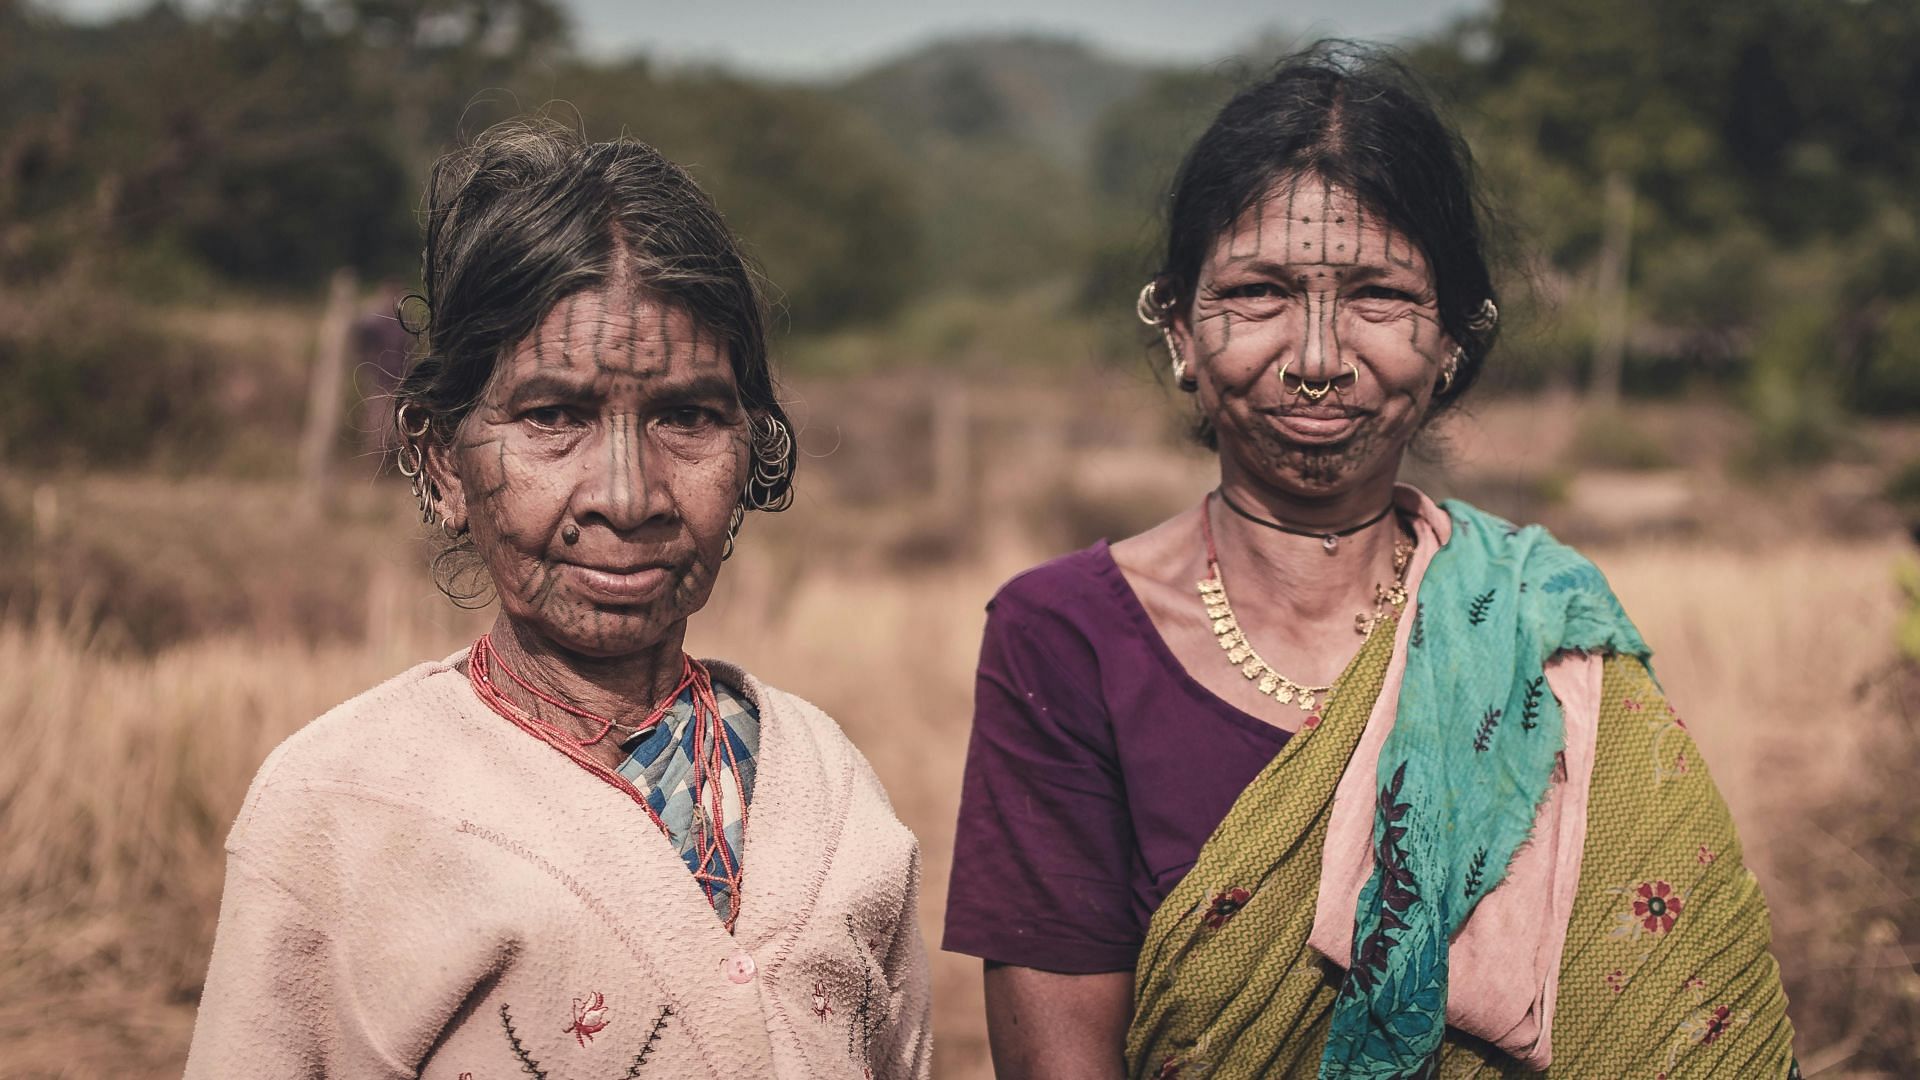 There are many who live in the margins of society, how do we help them? (Image via Pexels/Parij Photography)